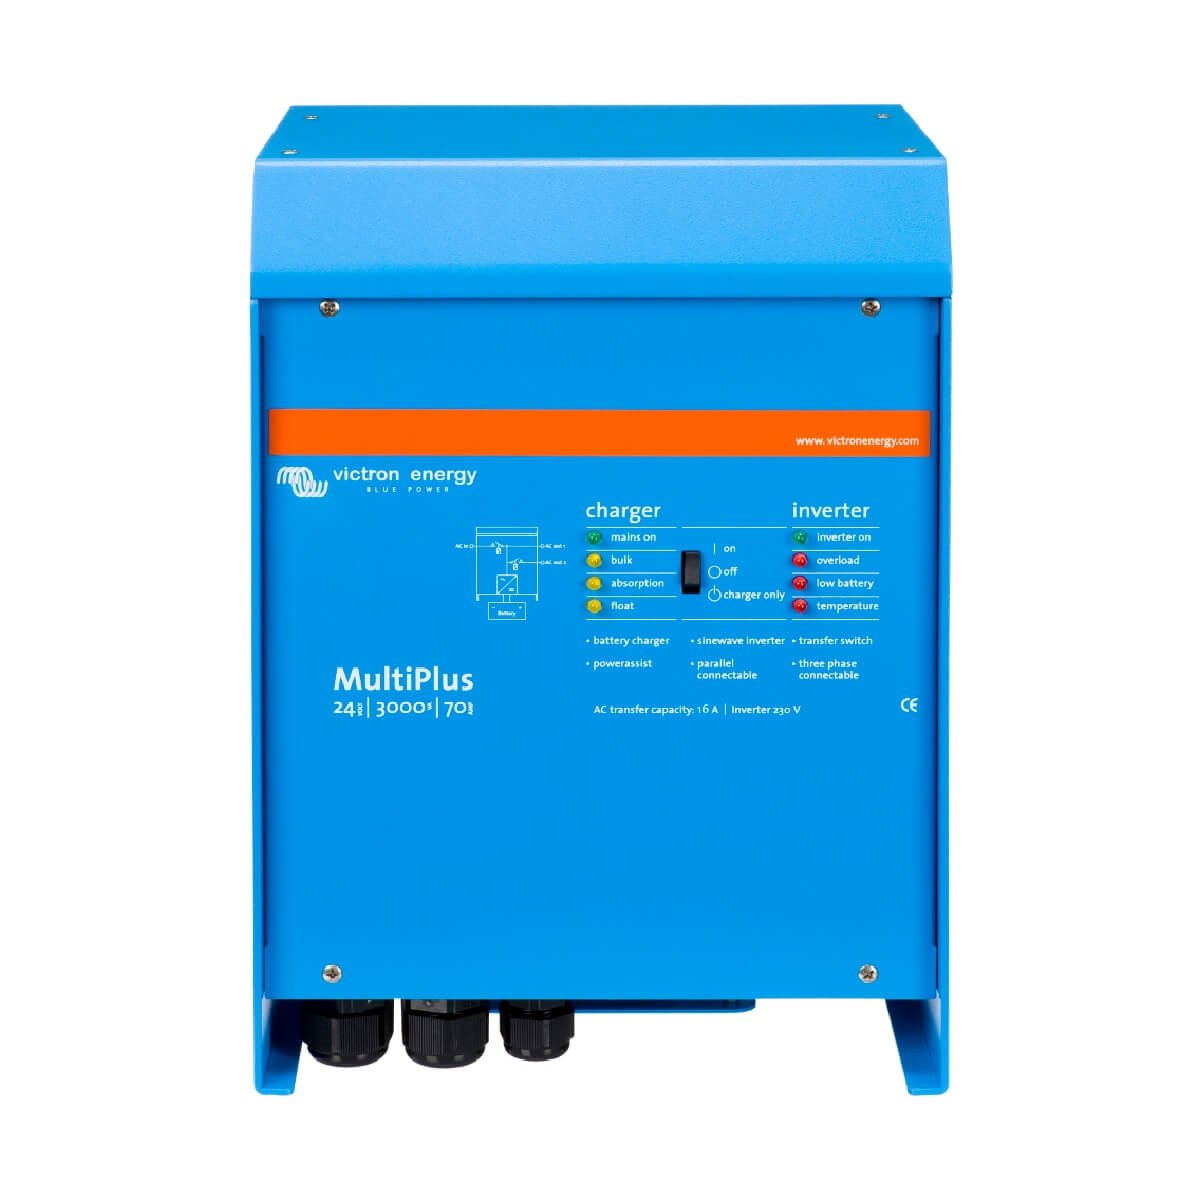 The Victron MultiPlus 24V 3000VA Inverter/Charger features a control panel and multiple connectors, offering robust functionality in a compact design.